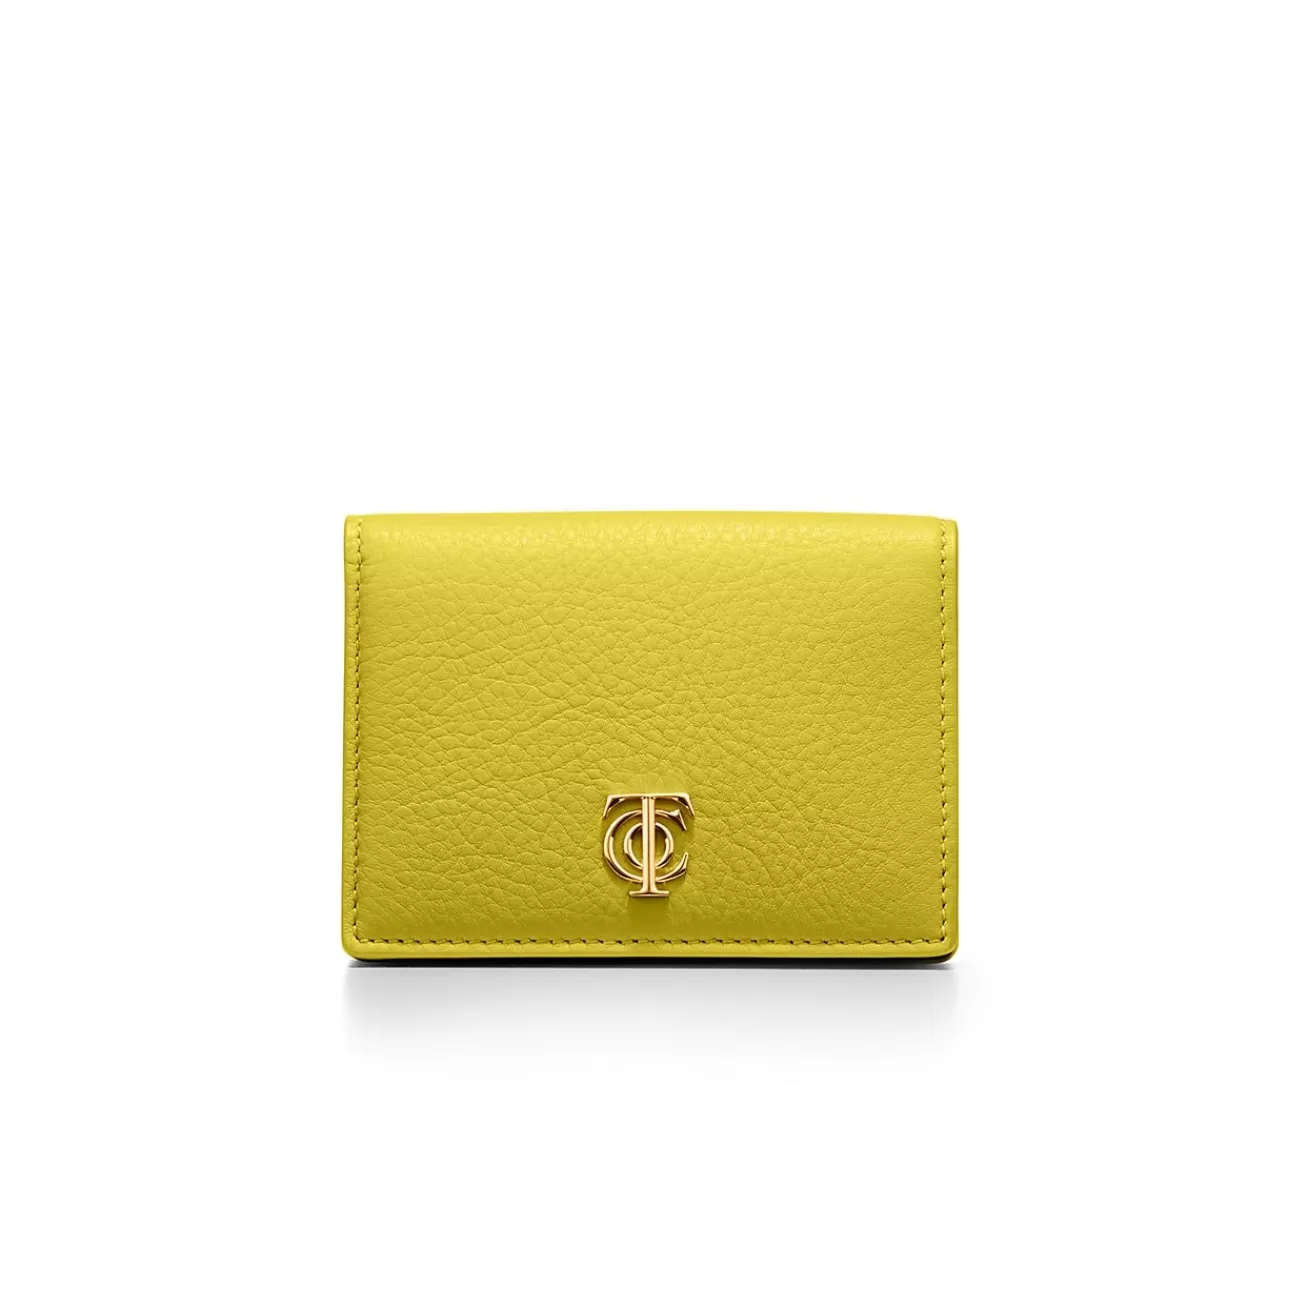 Tiffany & Co. T&CO. Flap Card Holder in Chartreuse Leather | ^Women Small Leather Goods | Women's Accessories